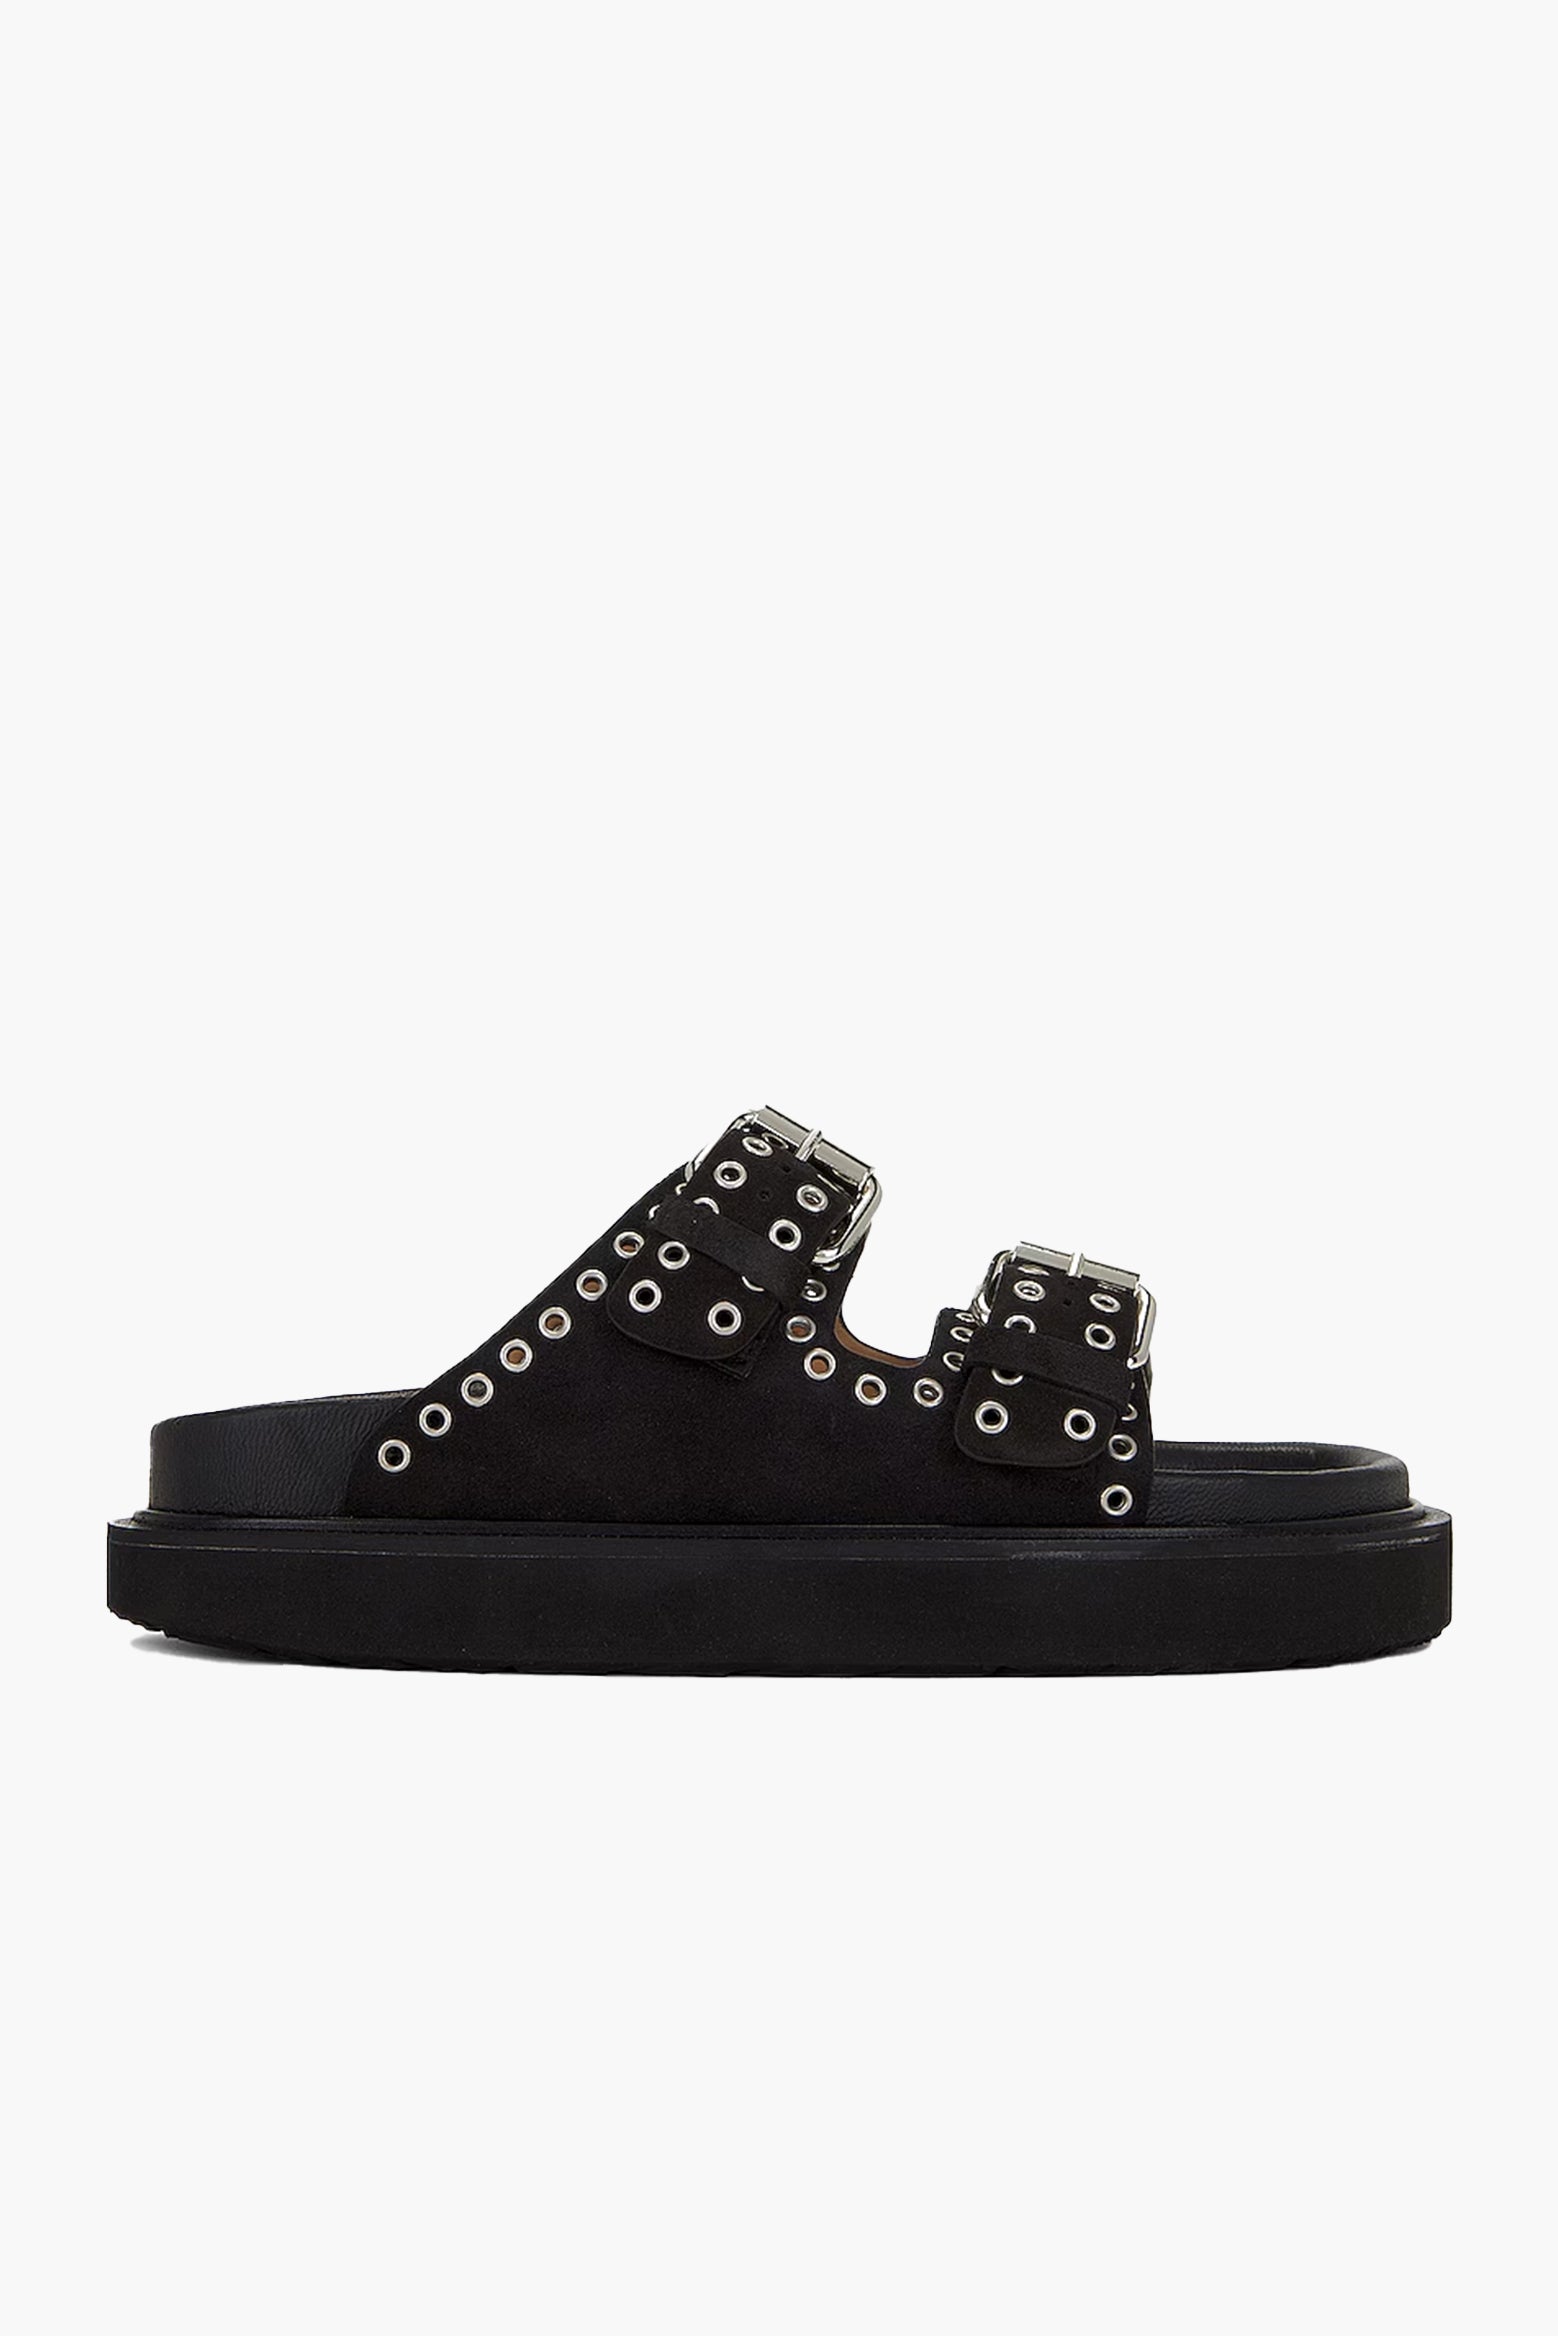 The Isabel Marant Lennya Sandals in Faded Black available at The New Trend Australia